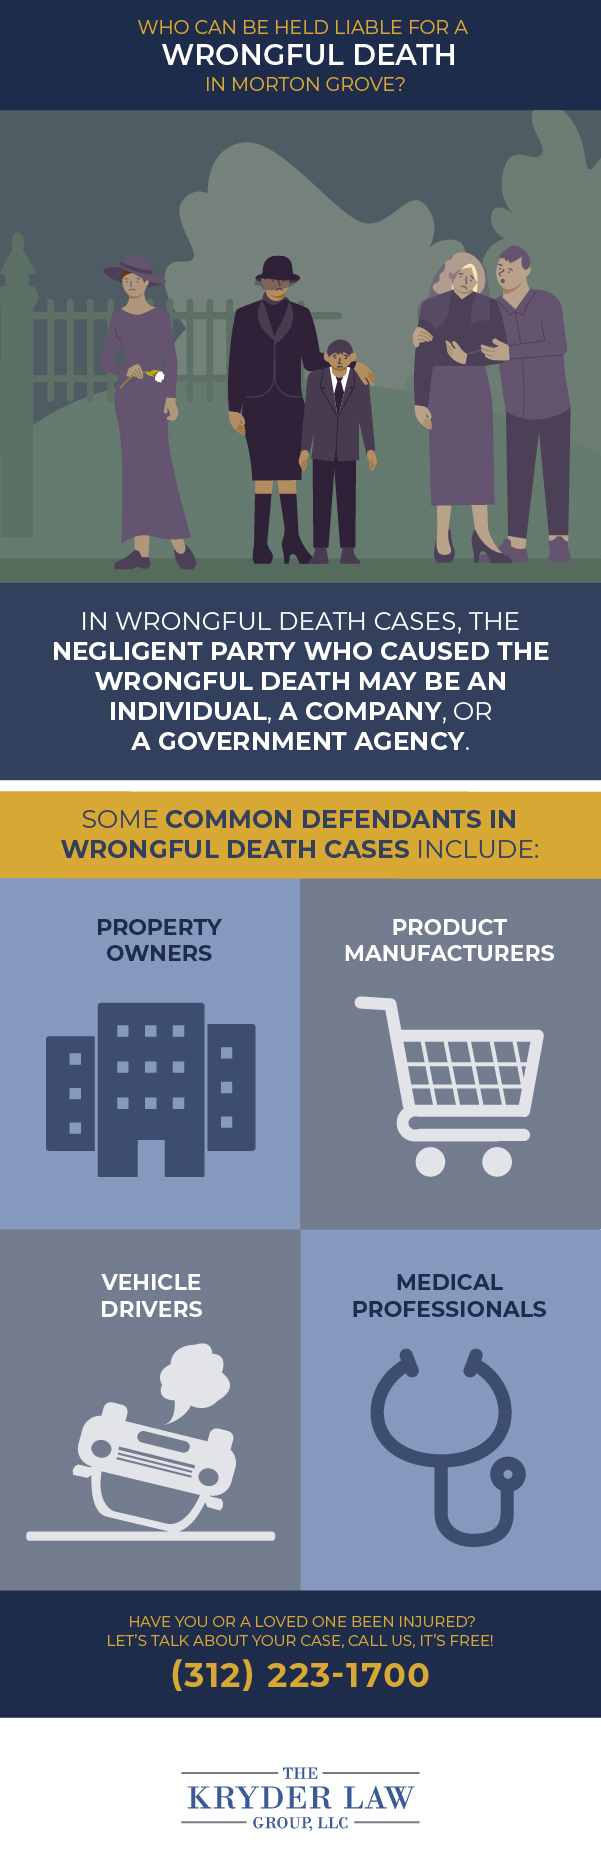 The Benefits of Hiring a Morton Grove Wrongful Death Lawyer Infographic